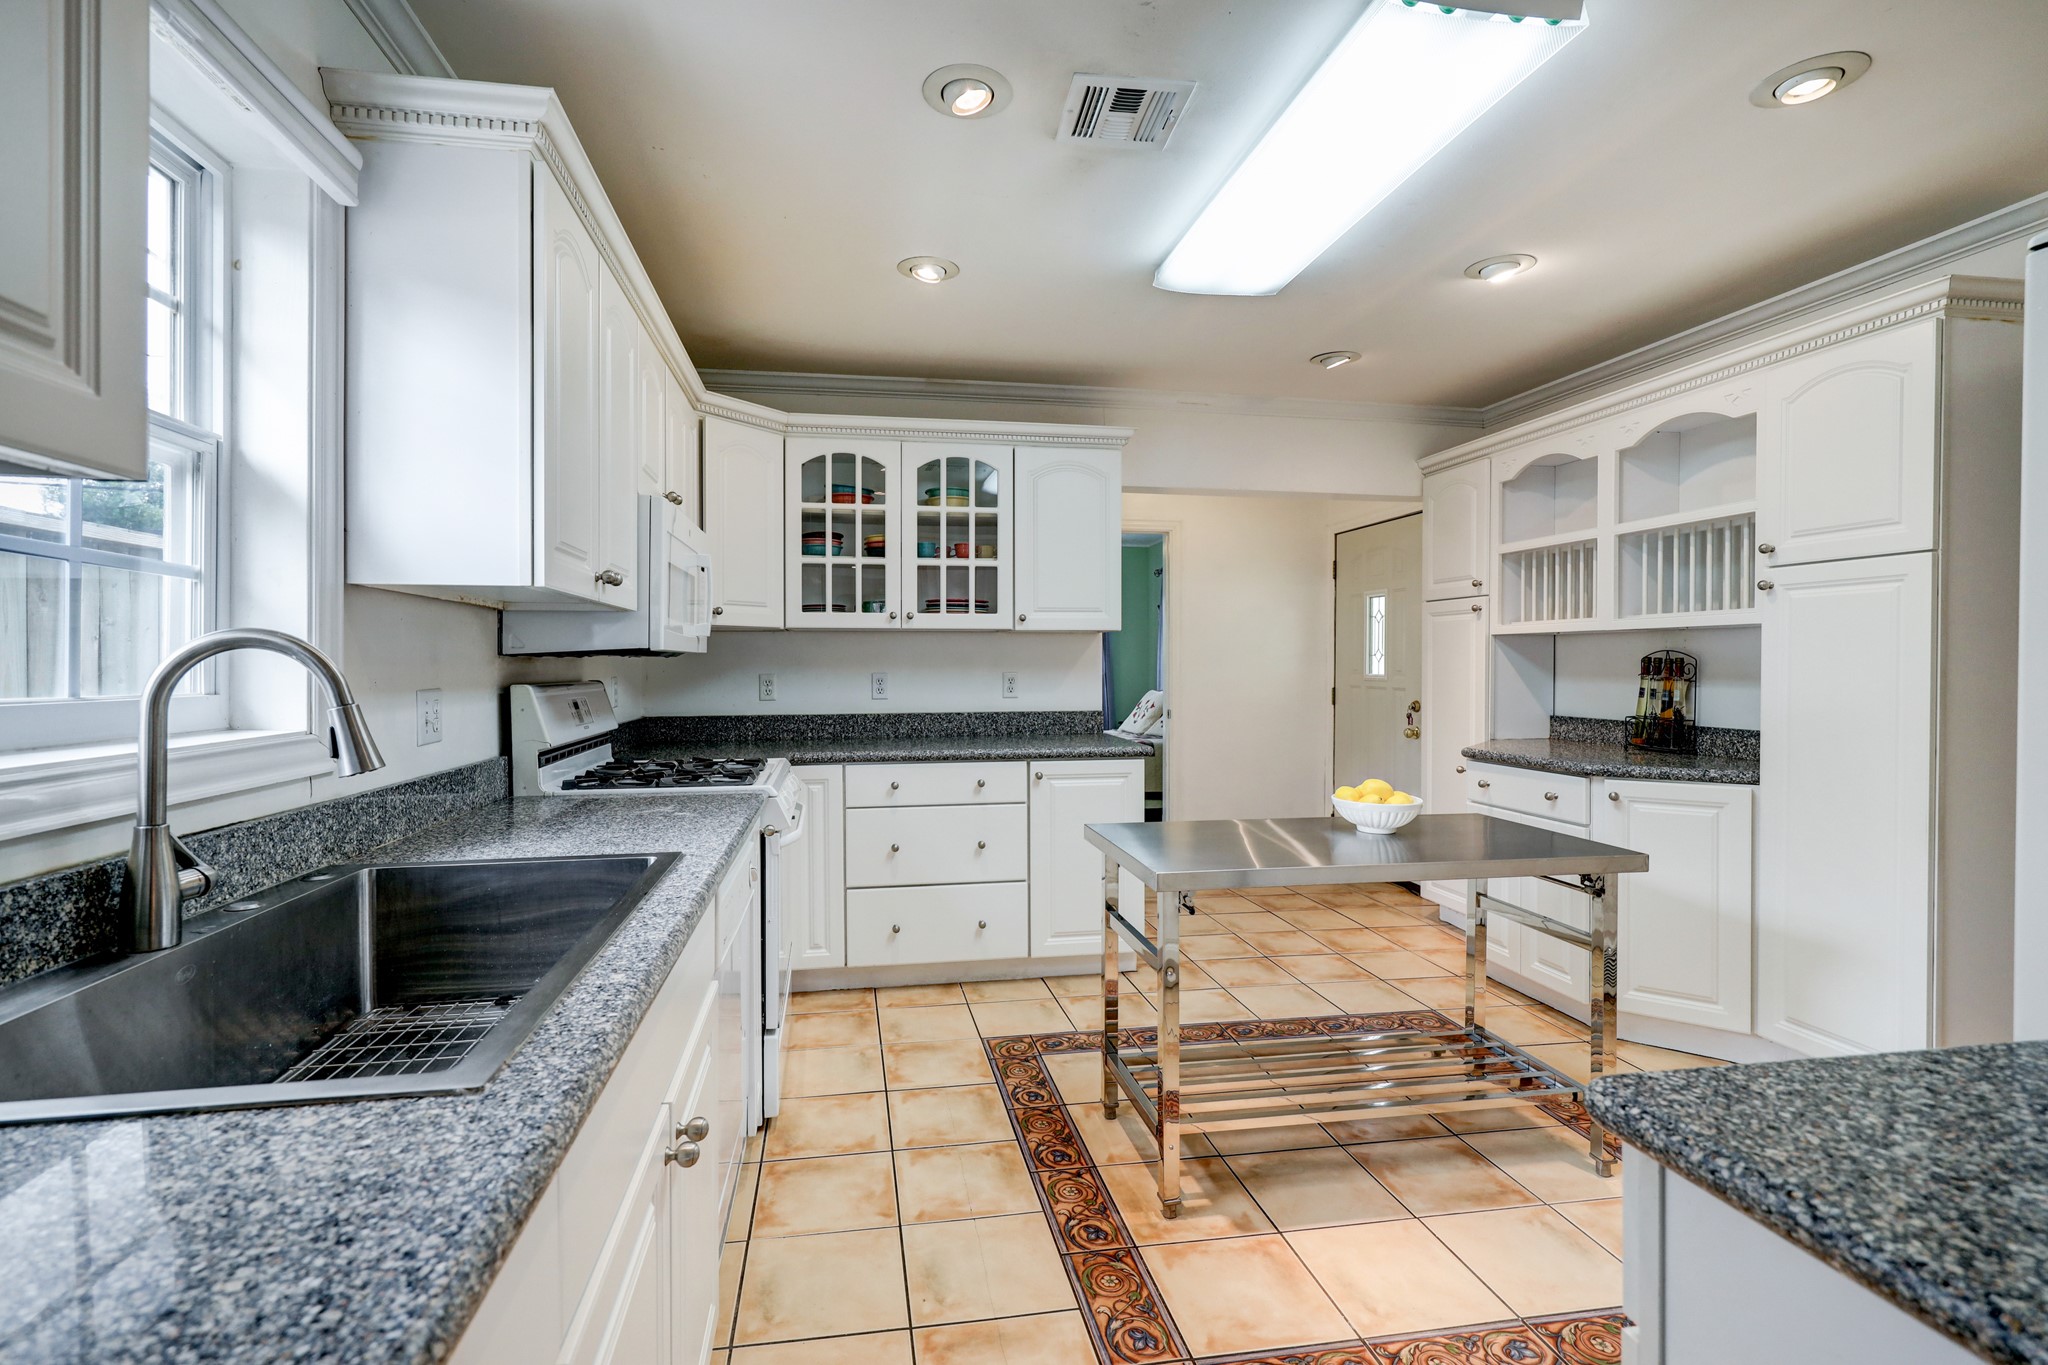 KITCHEN - Showing the space and proximity to storage. Double sink and plenty of prep space to cook your favorite meal.